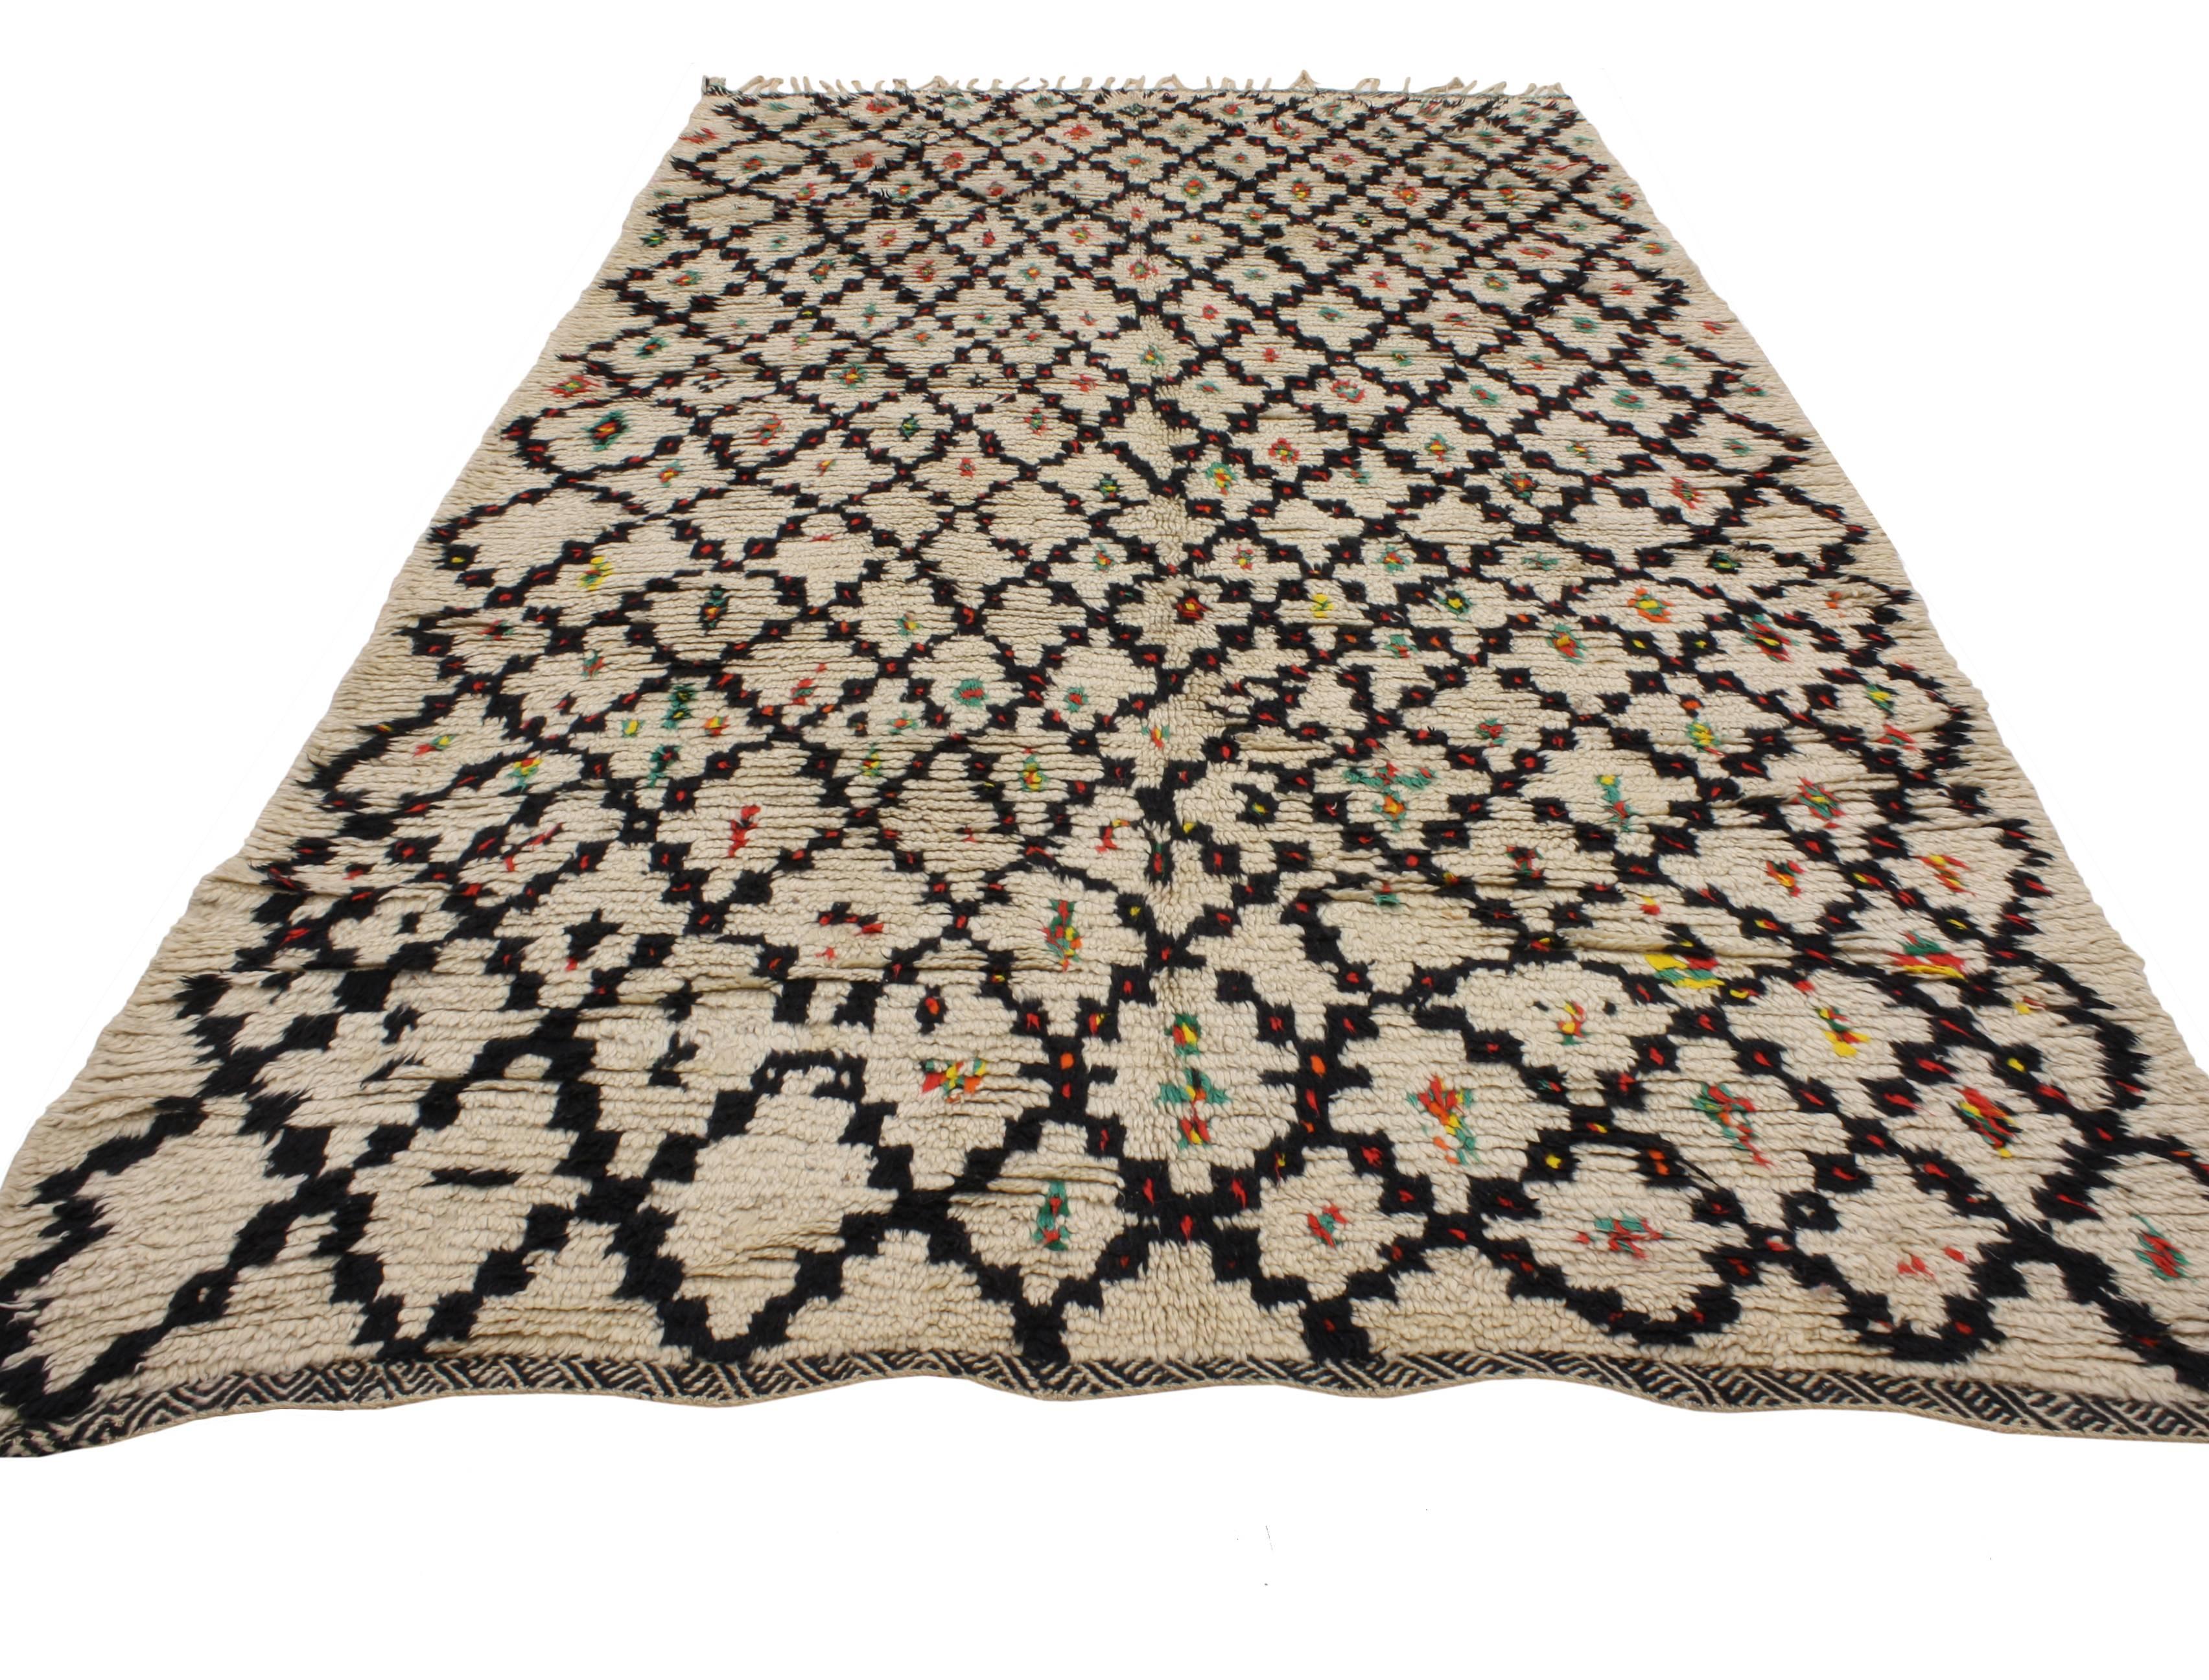 Hand-Knotted Vintage Berber Moroccan Rug with Modern Tribal Style, Azilal Rug